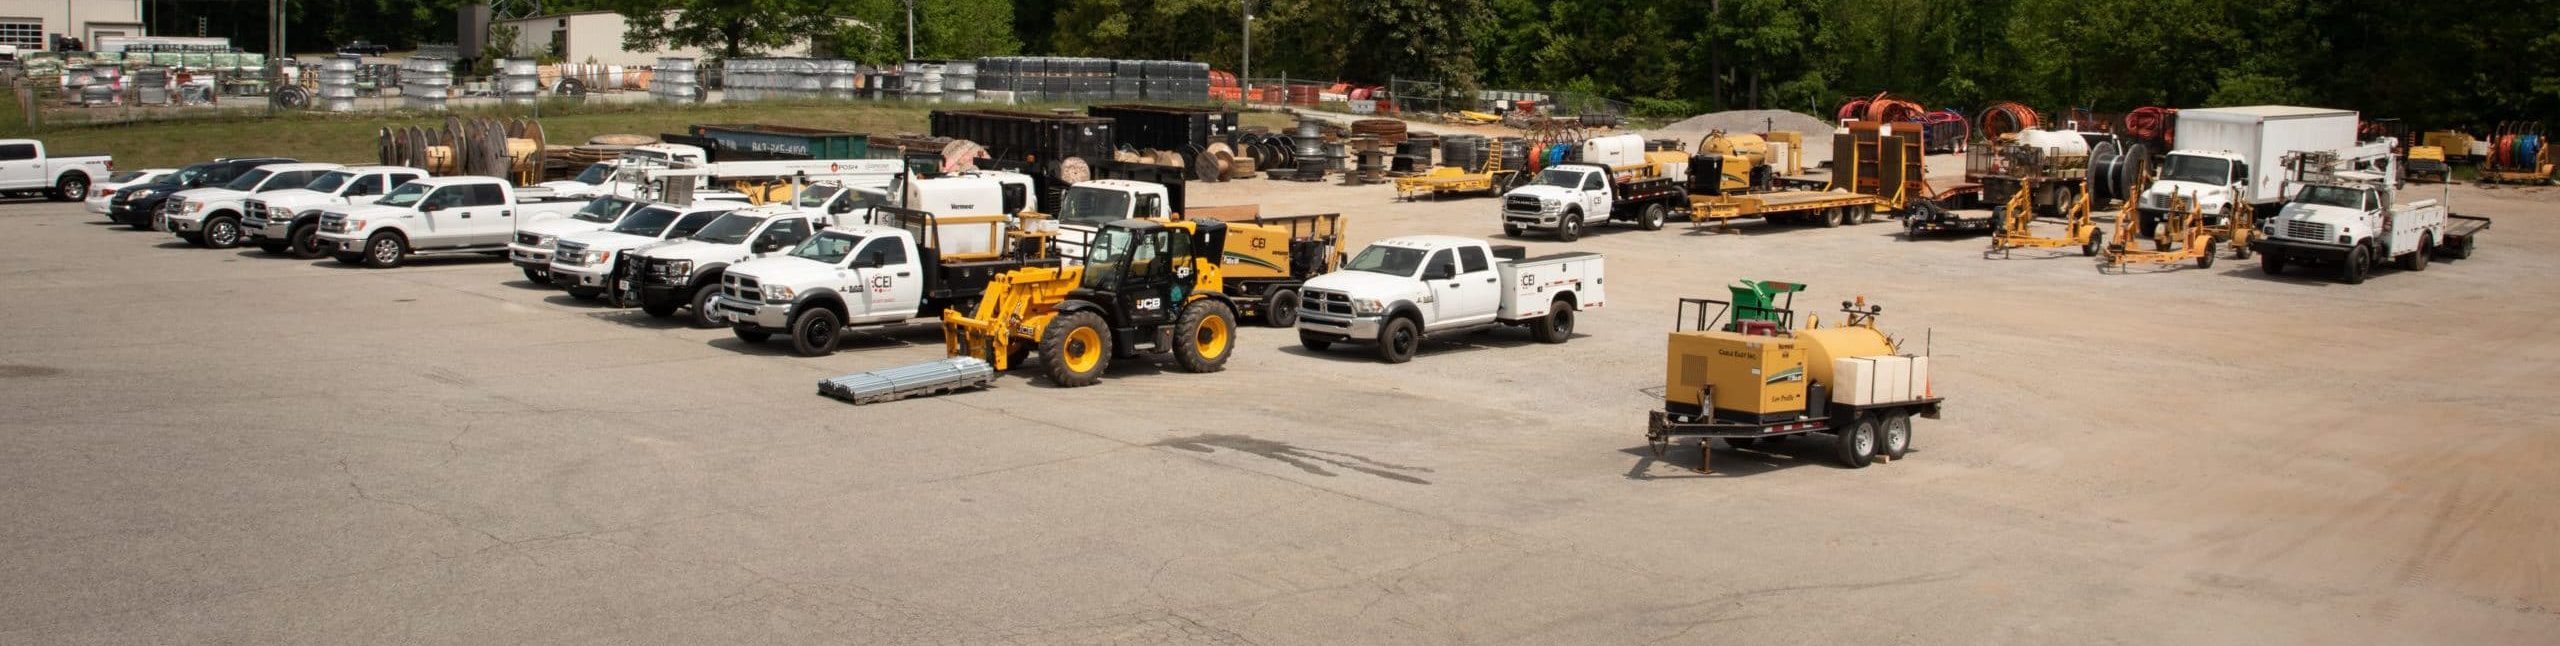 Vehicles and equipment that are lined up and ready to be taken out on site